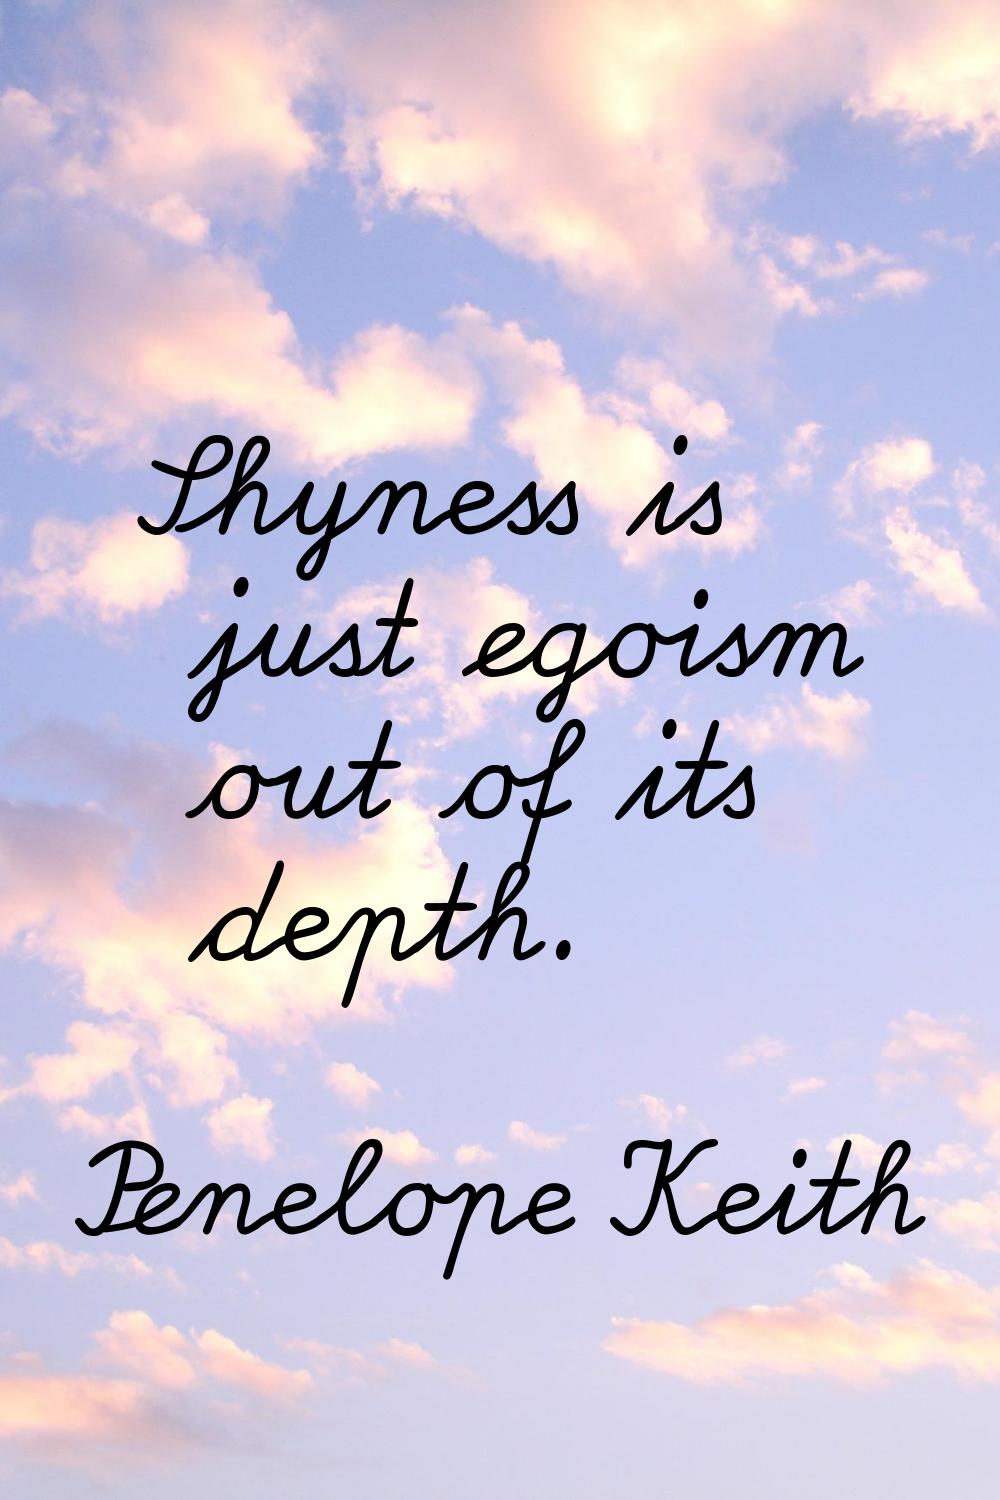 Shyness is just egoism out of its depth.